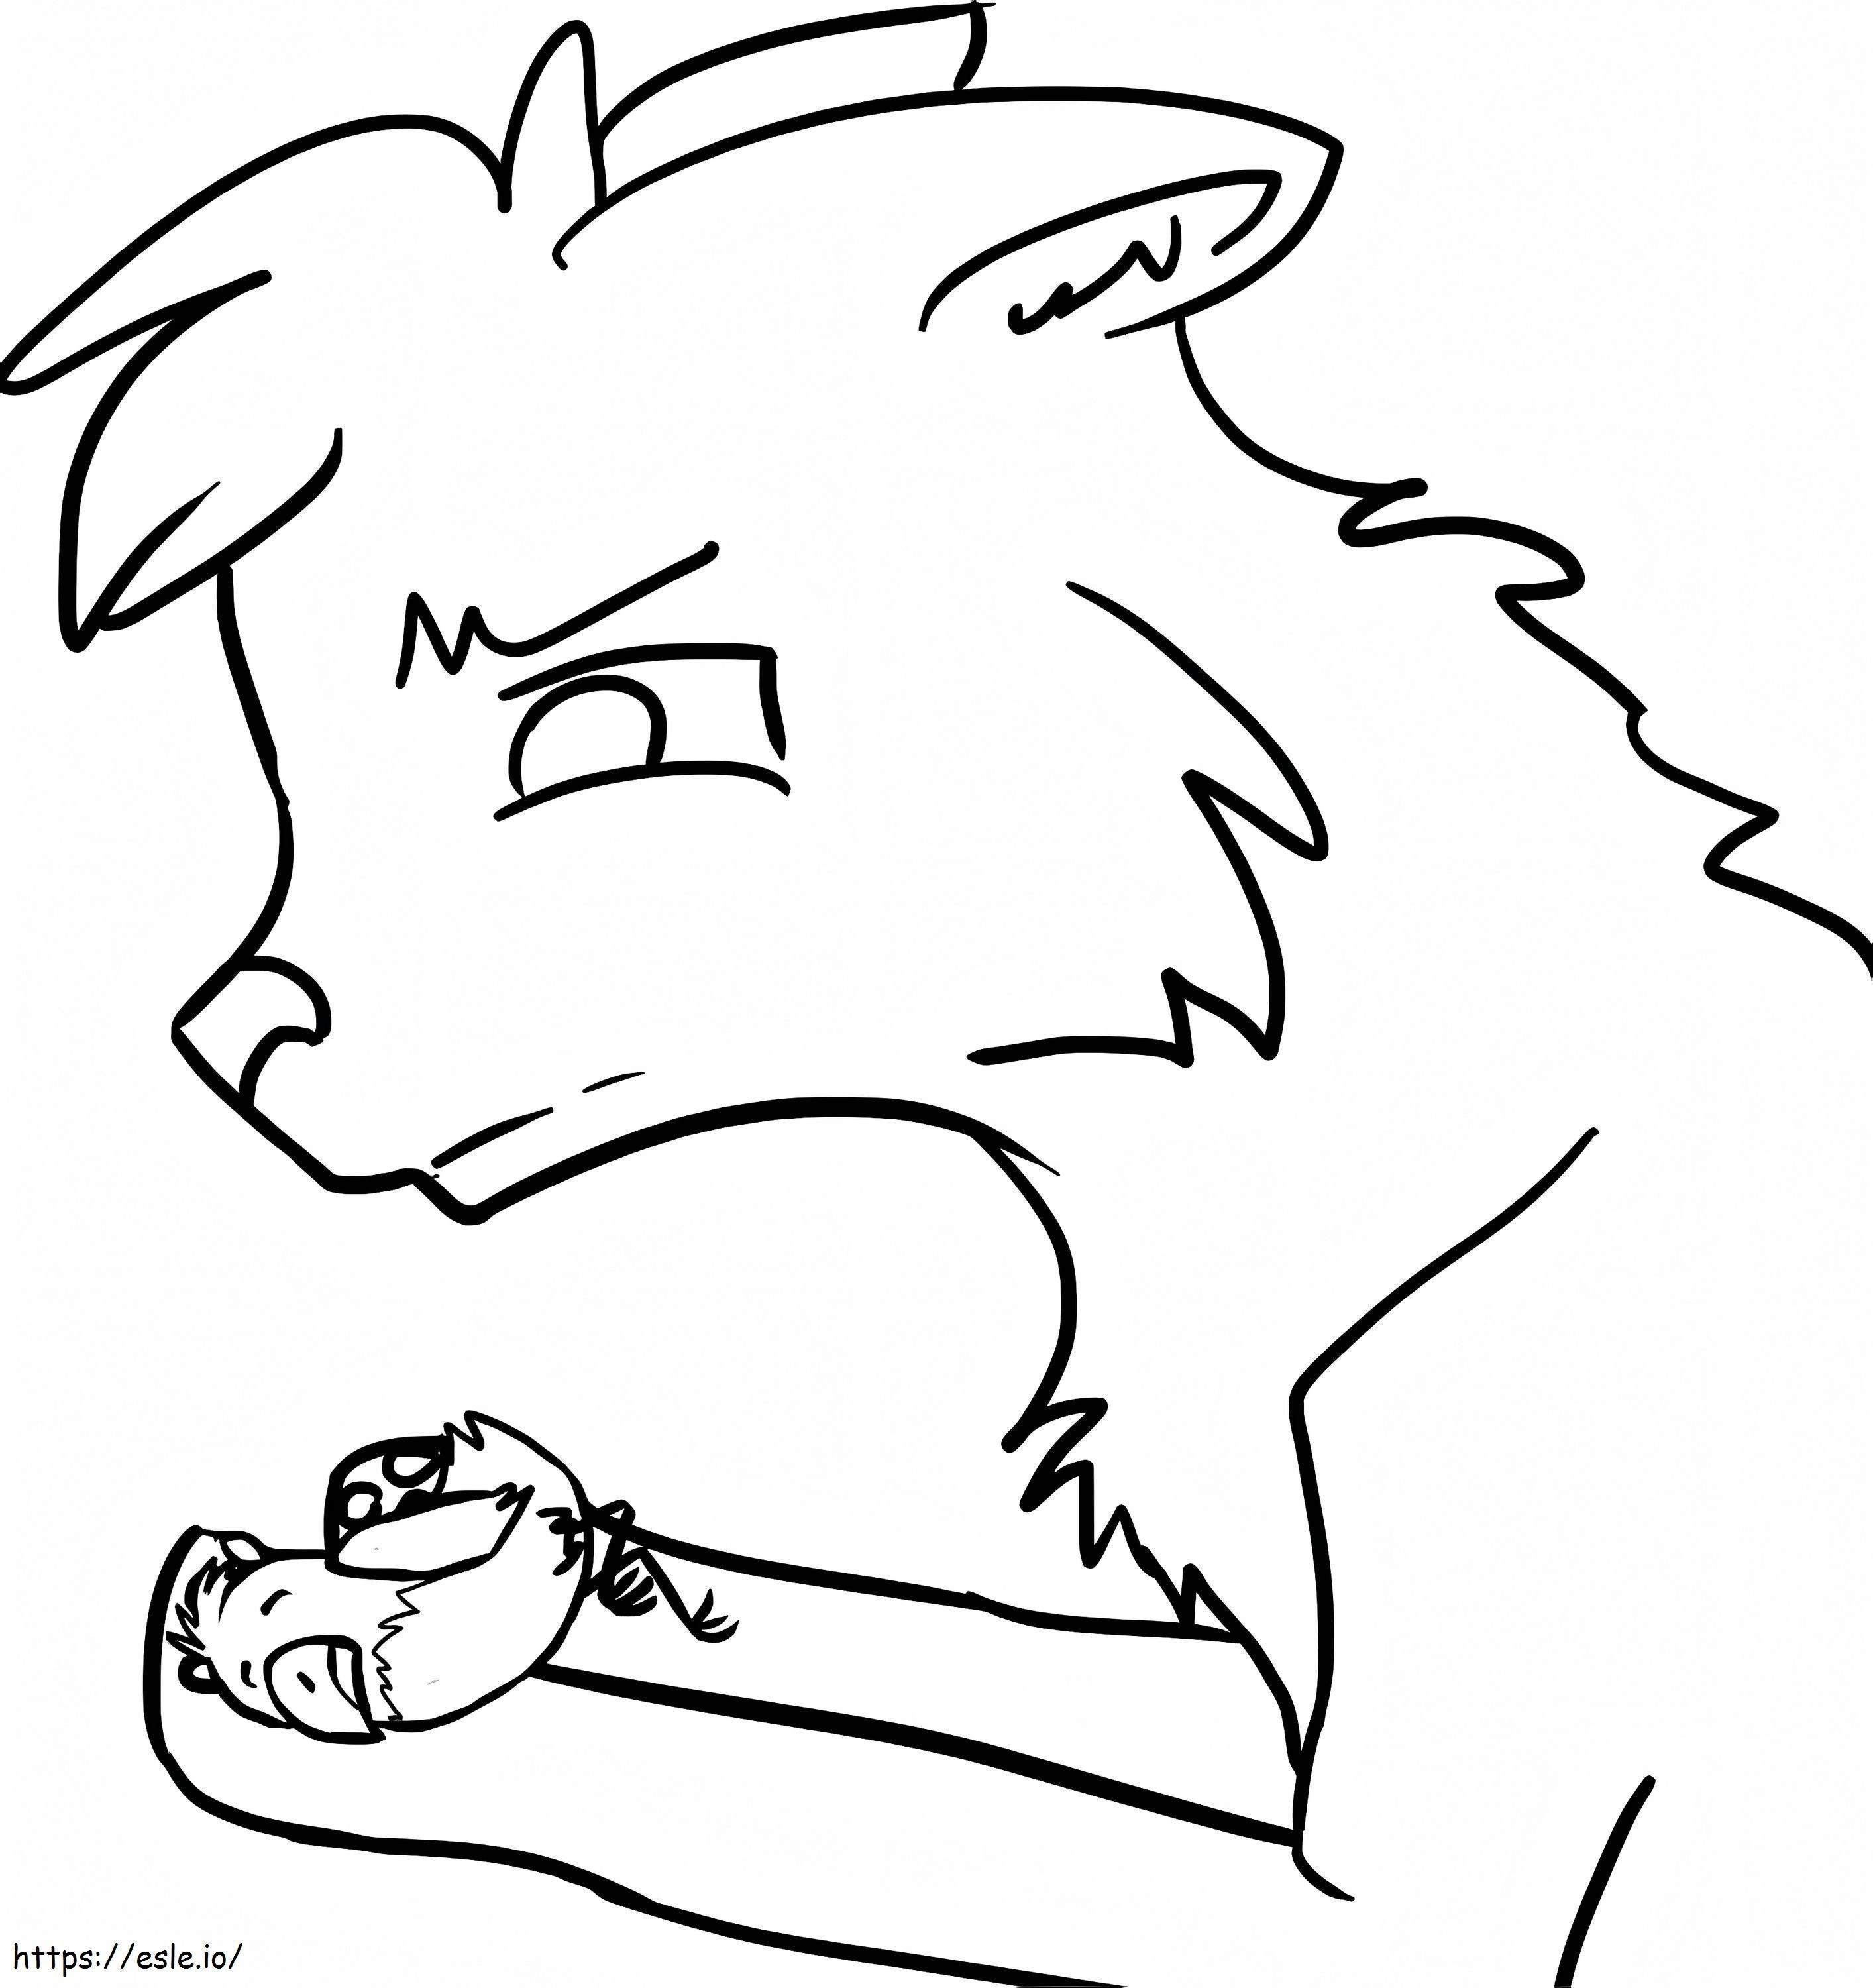 Sad Cat Warrior Face coloring page